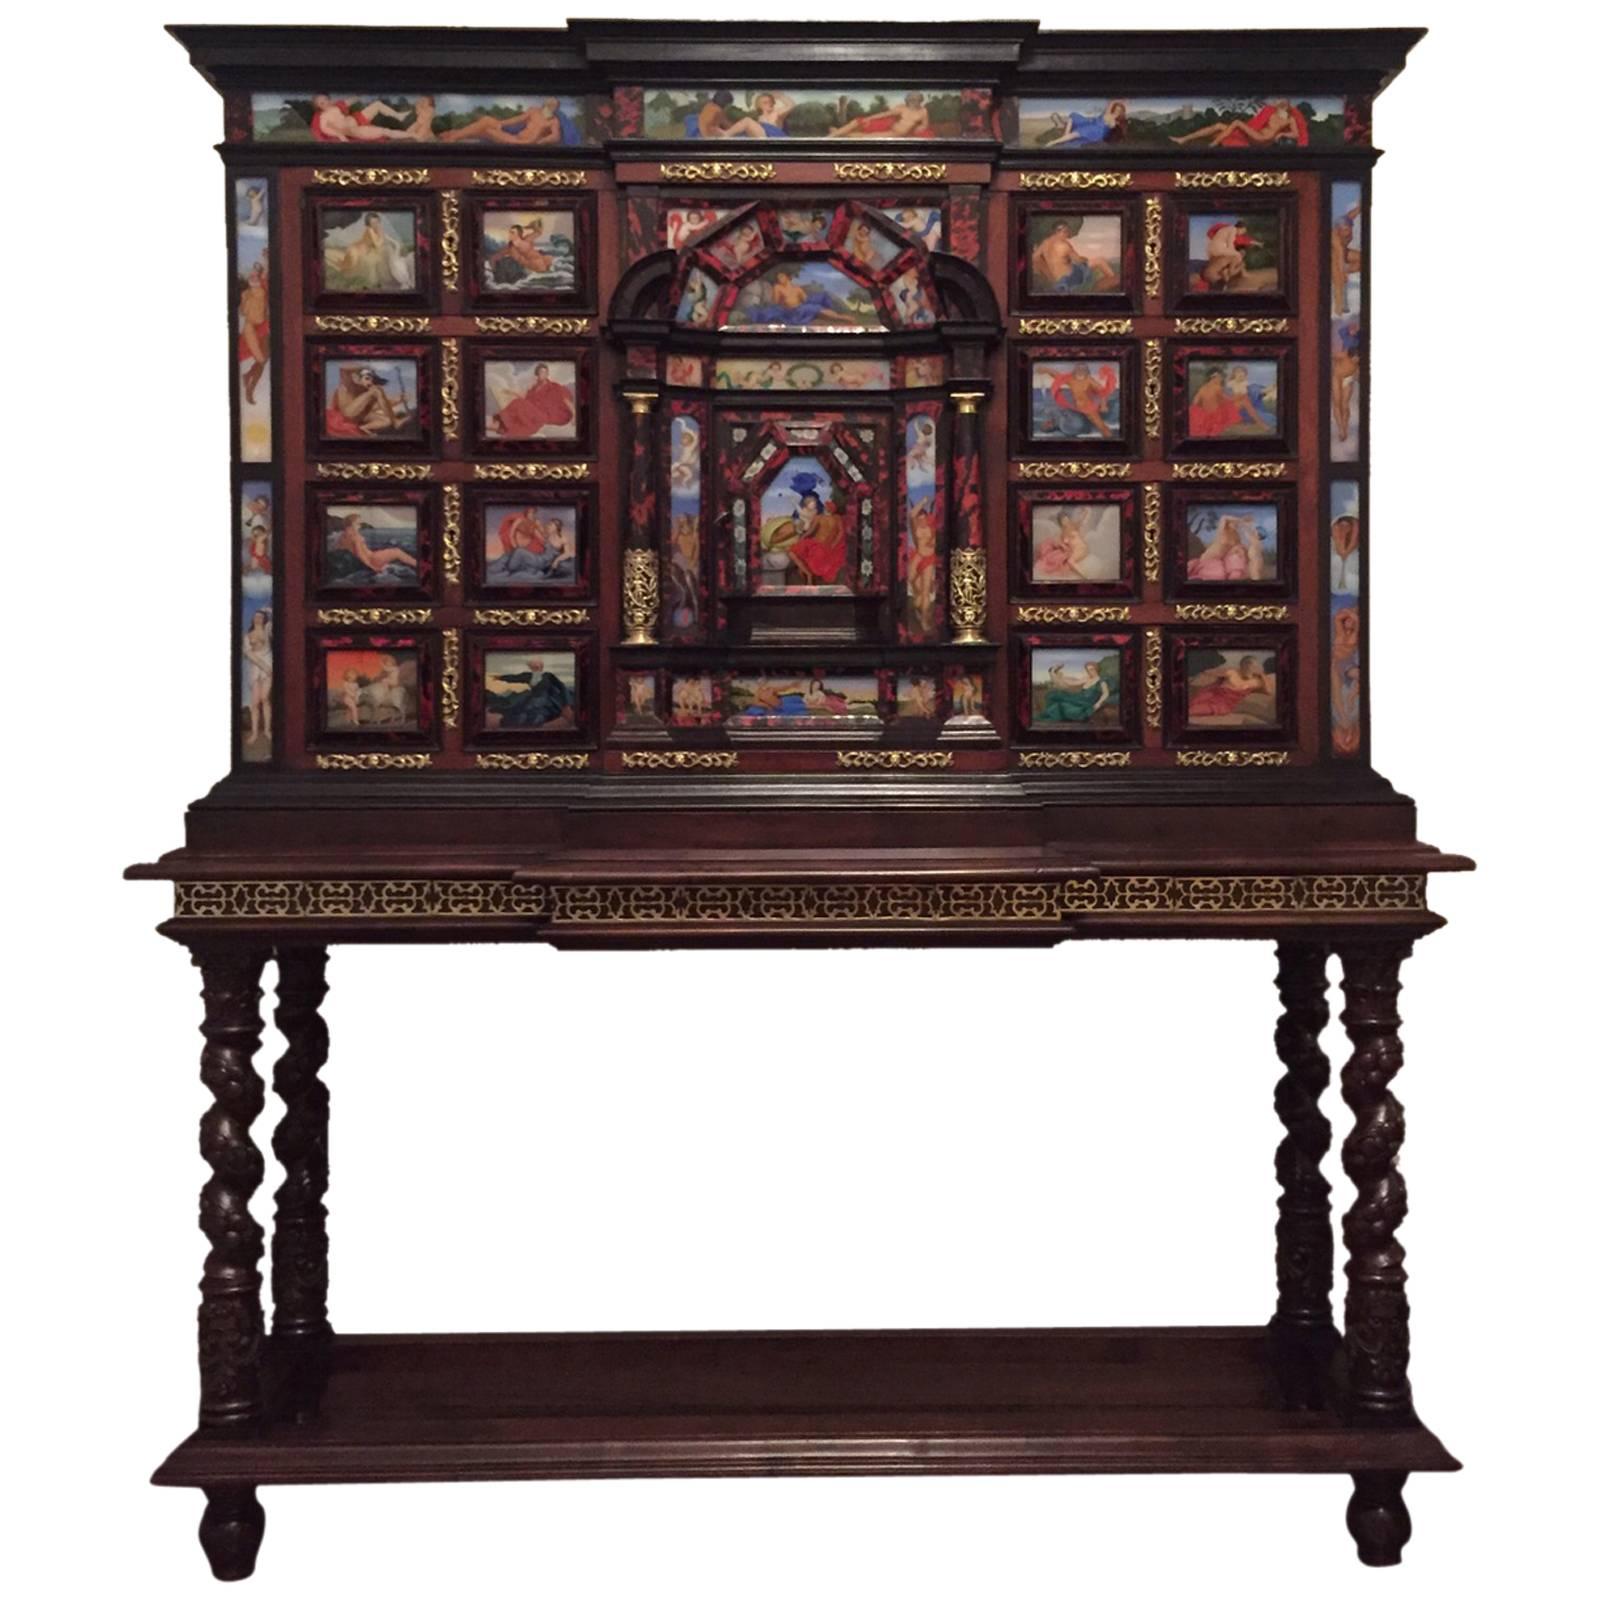 Important monumental cabinet on stand.
The case of the cabinet is walnut, veneered with rich rib boned ebony and luxuriously decorated with turtle shell, bronze, carey.
Bargueno with 49 glass paintings in bright colors, depicting gods of